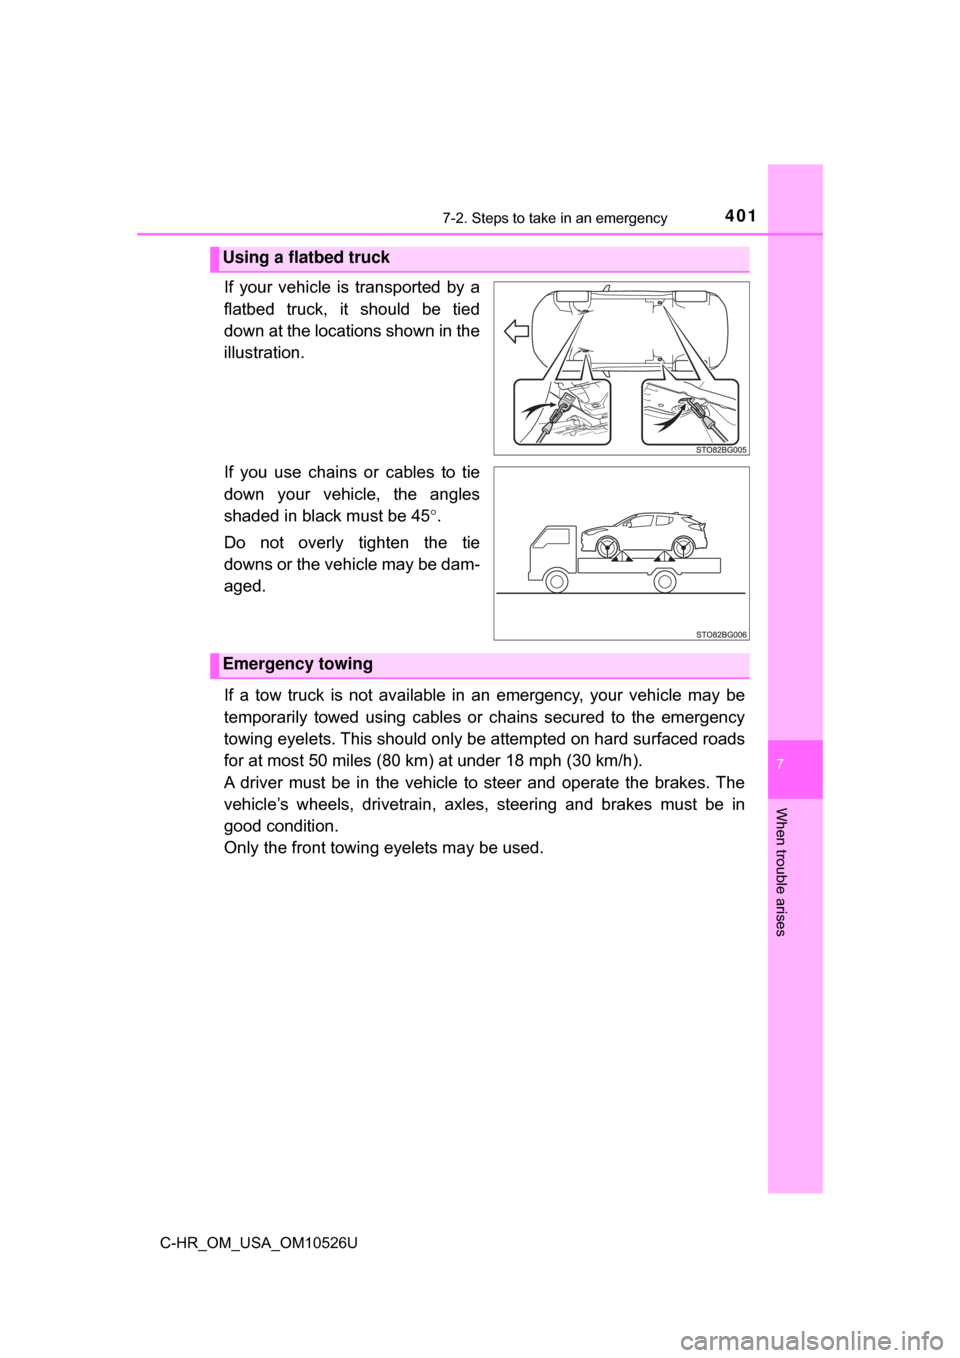 TOYOTA C-HR 2018 1.G Owners Manual 4017-2. Steps to take in an emergency
7
When trouble arises
C-HR_OM_USA_OM10526U
If your vehicle is transported by a
flatbed truck, it should be tied
down at the locations shown in the
illustration.
I